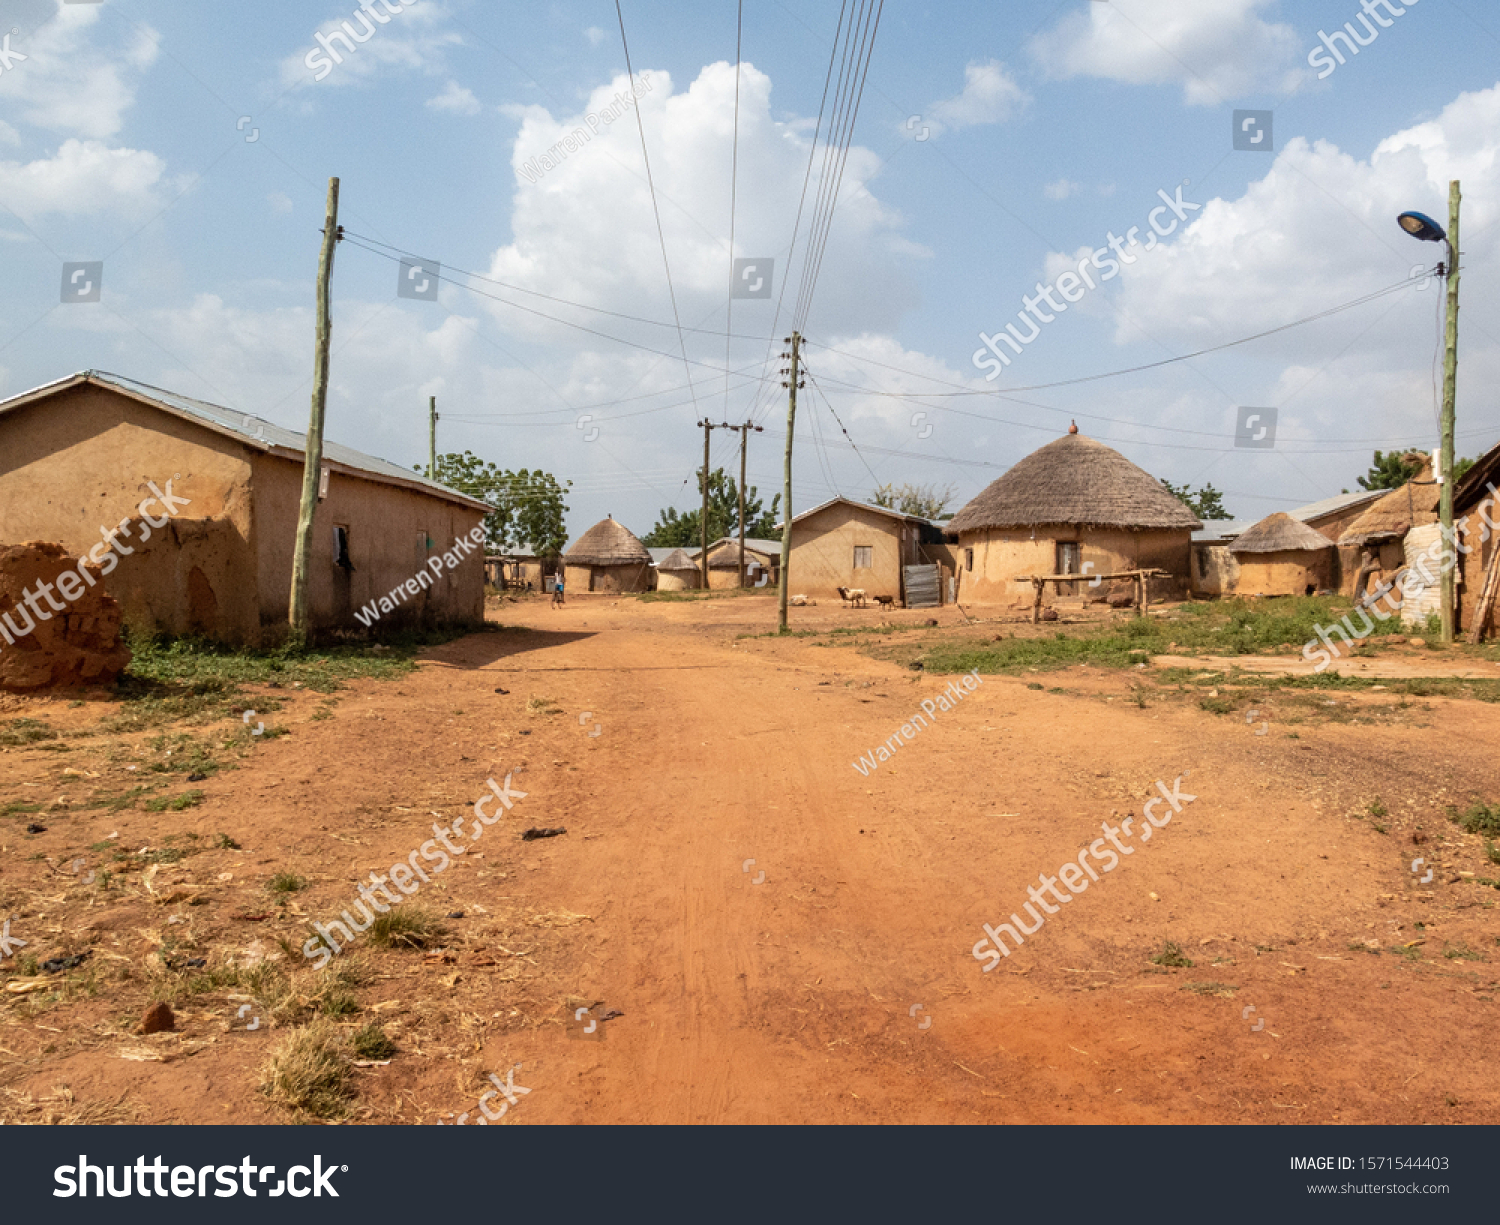 Rural electrification in Northern Ghana #1571544403